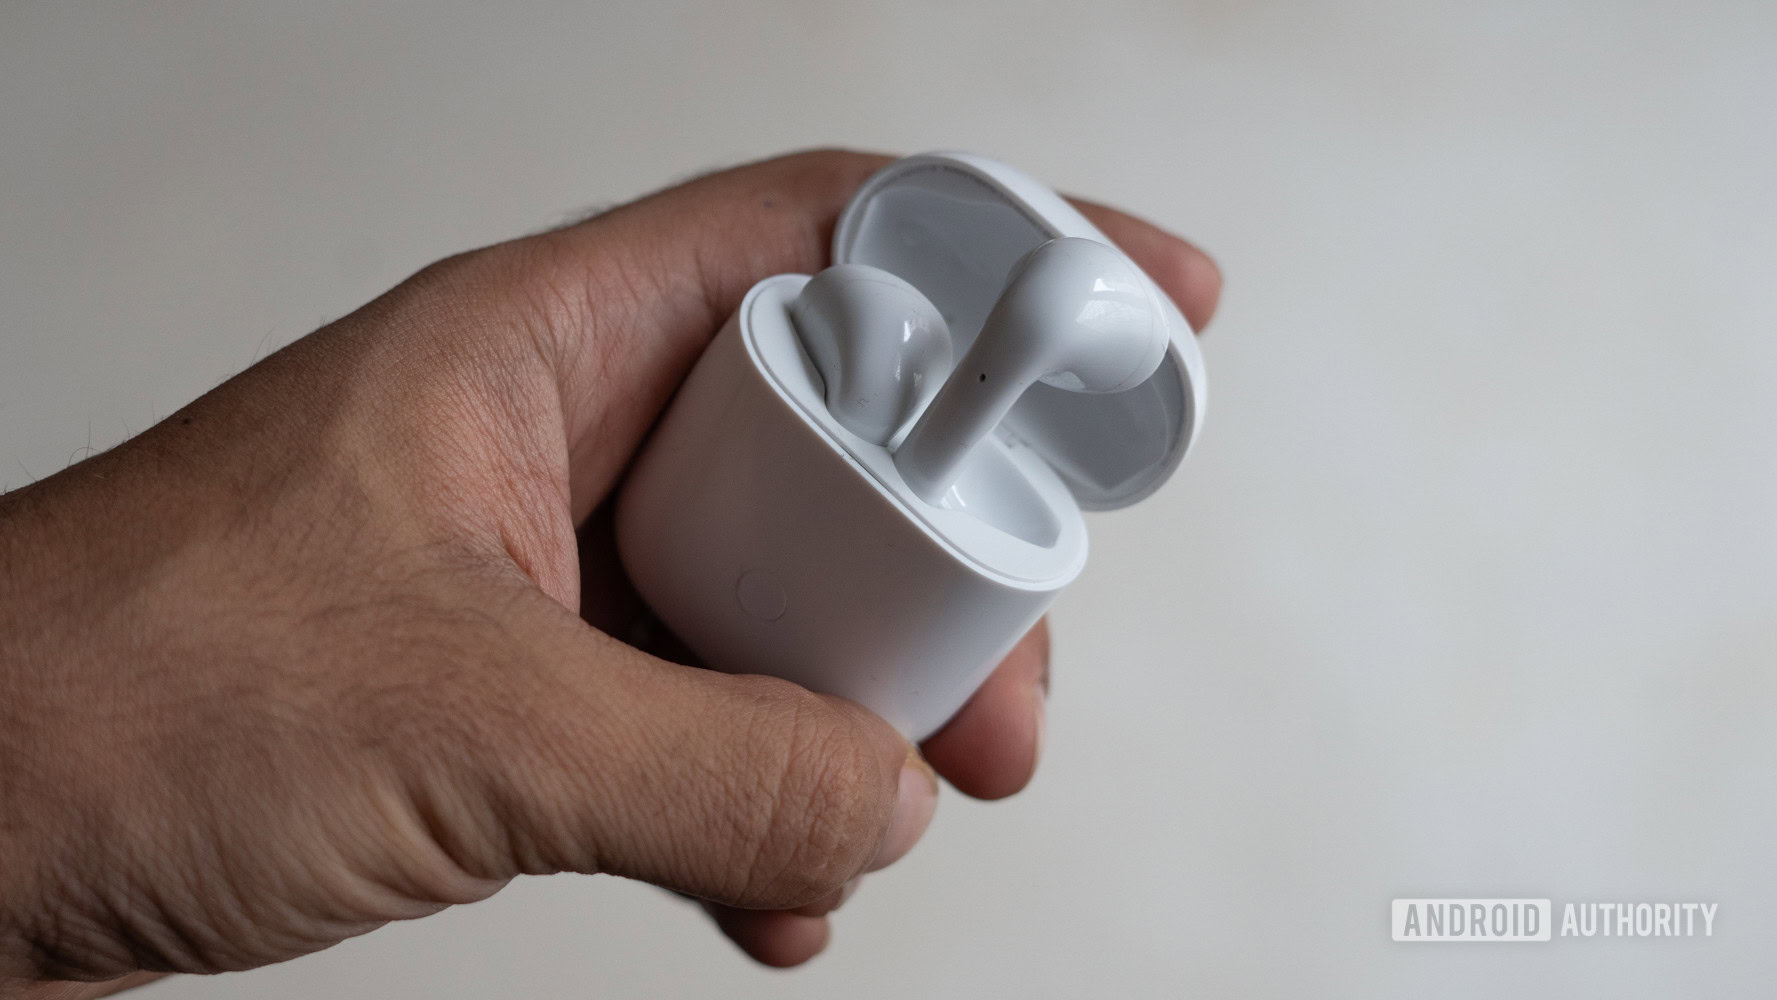 We to stop with the AirPods clones - Android Authority